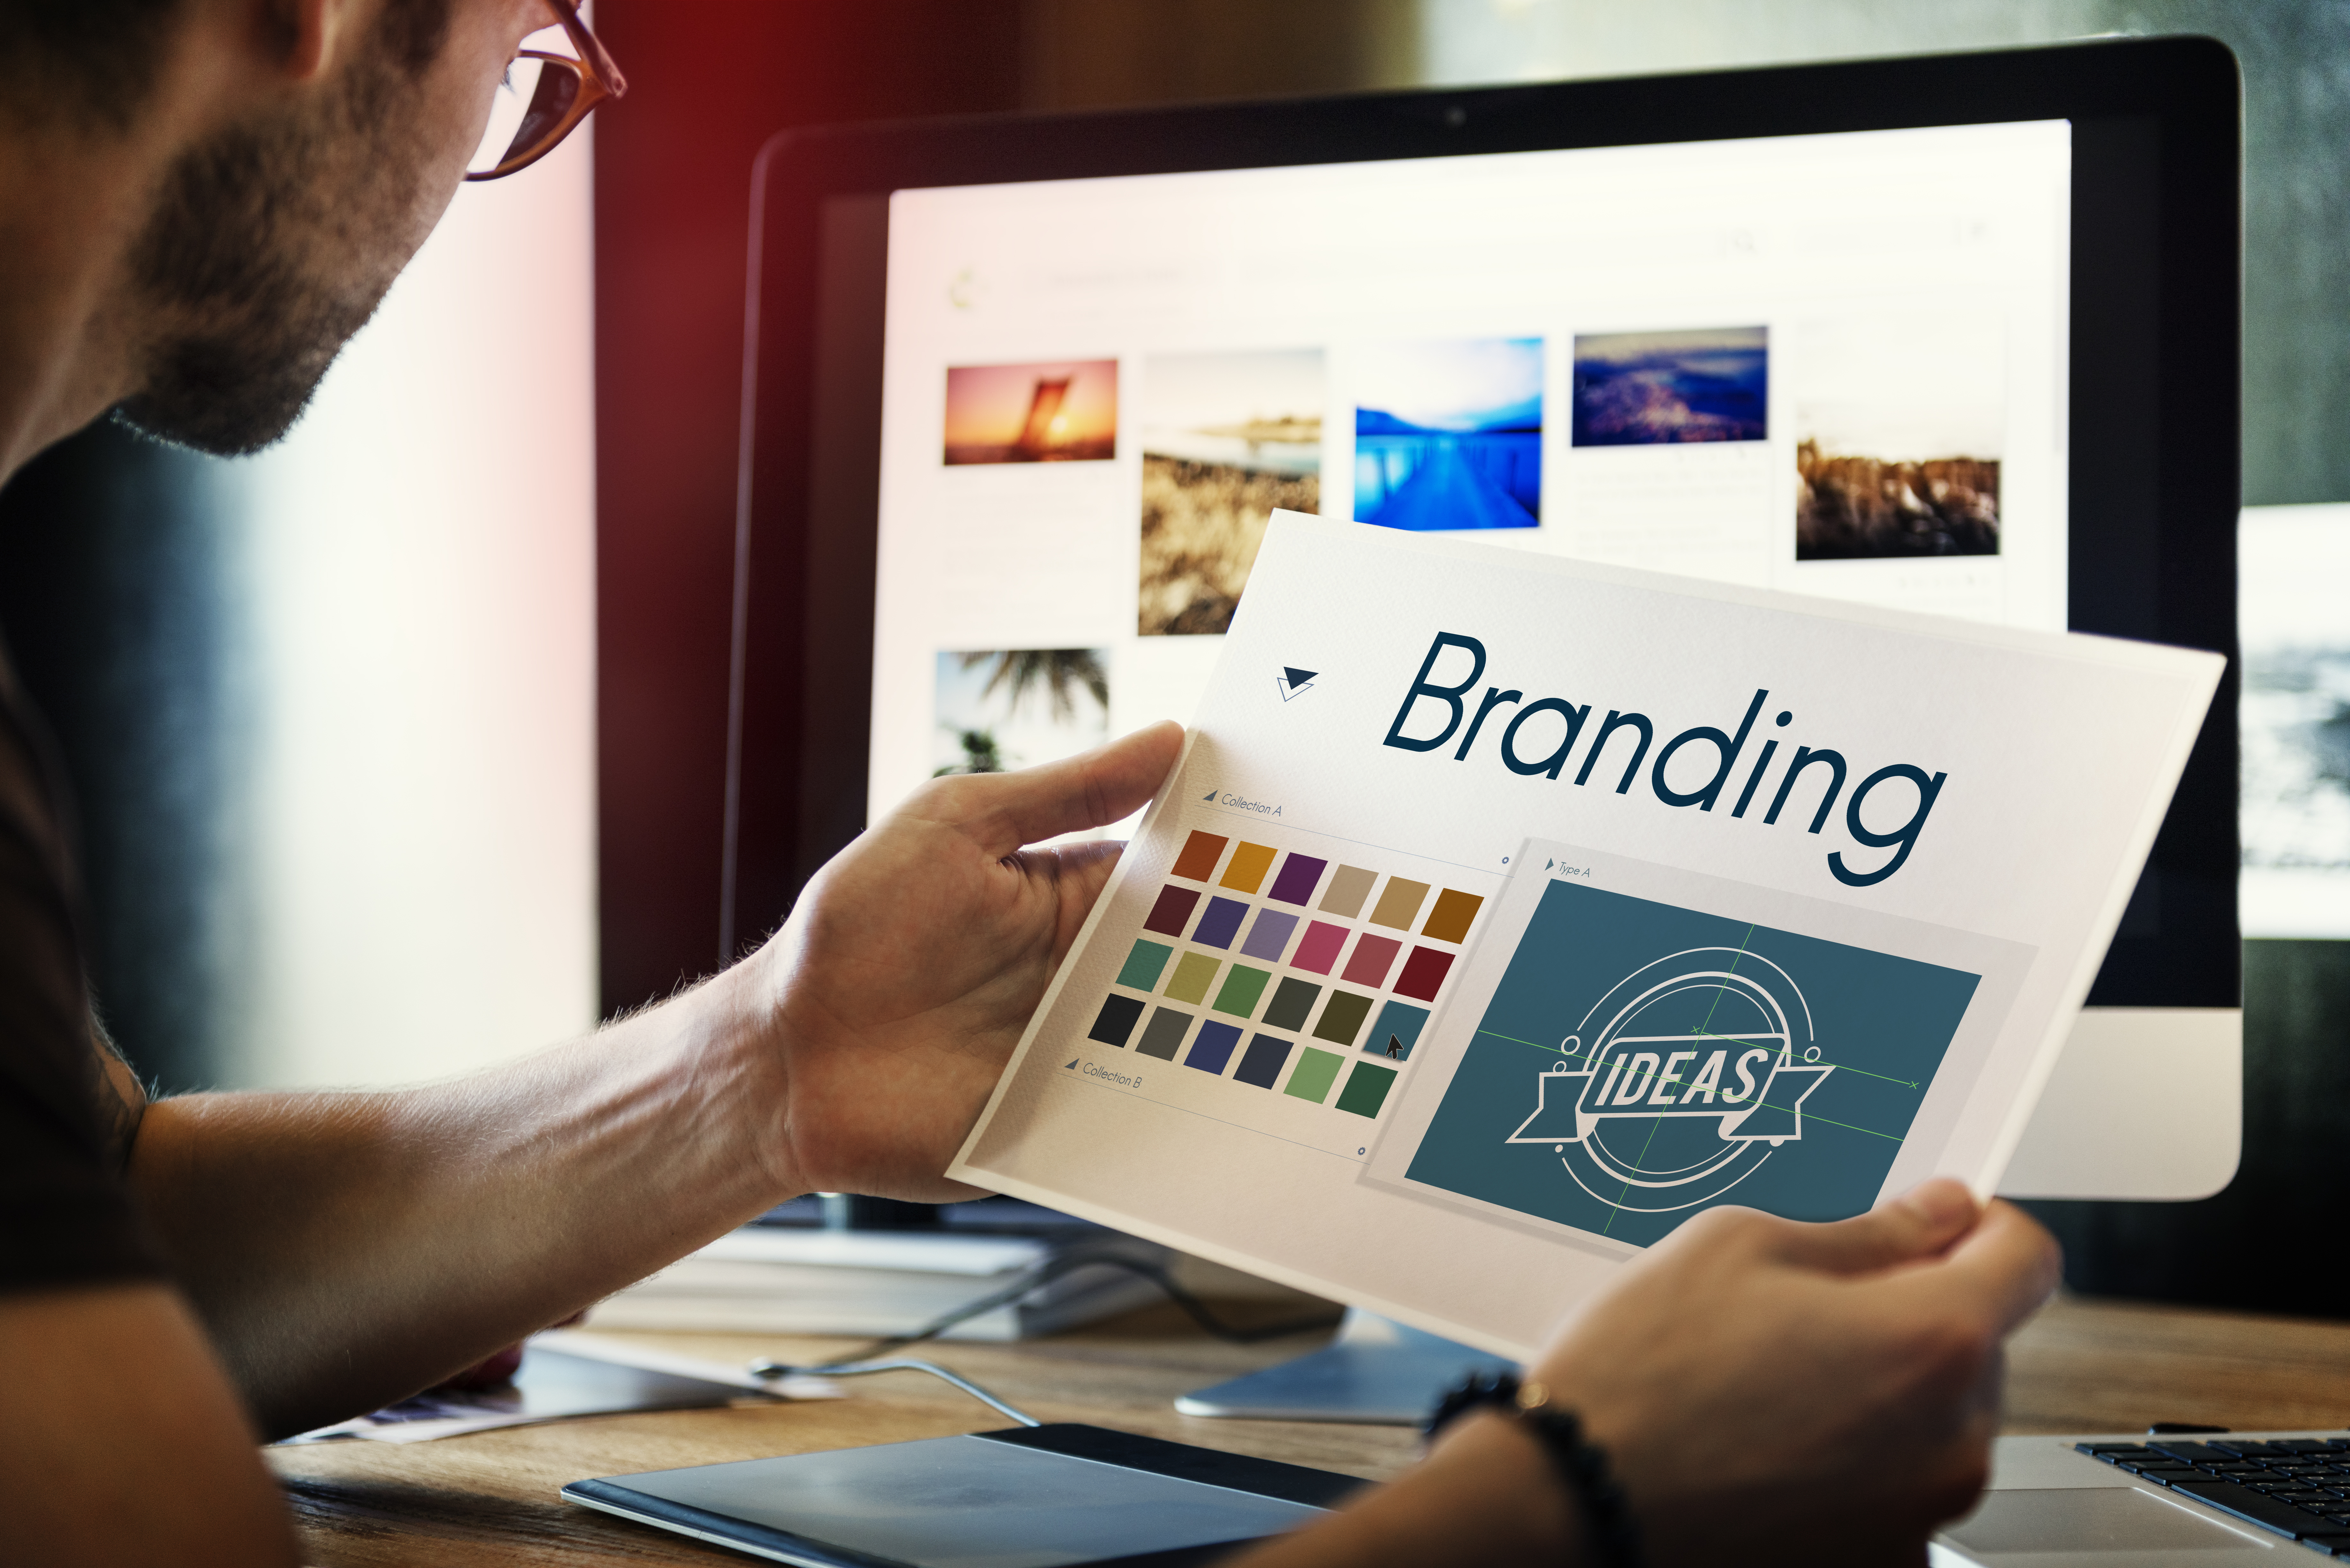 Elements of a Brand